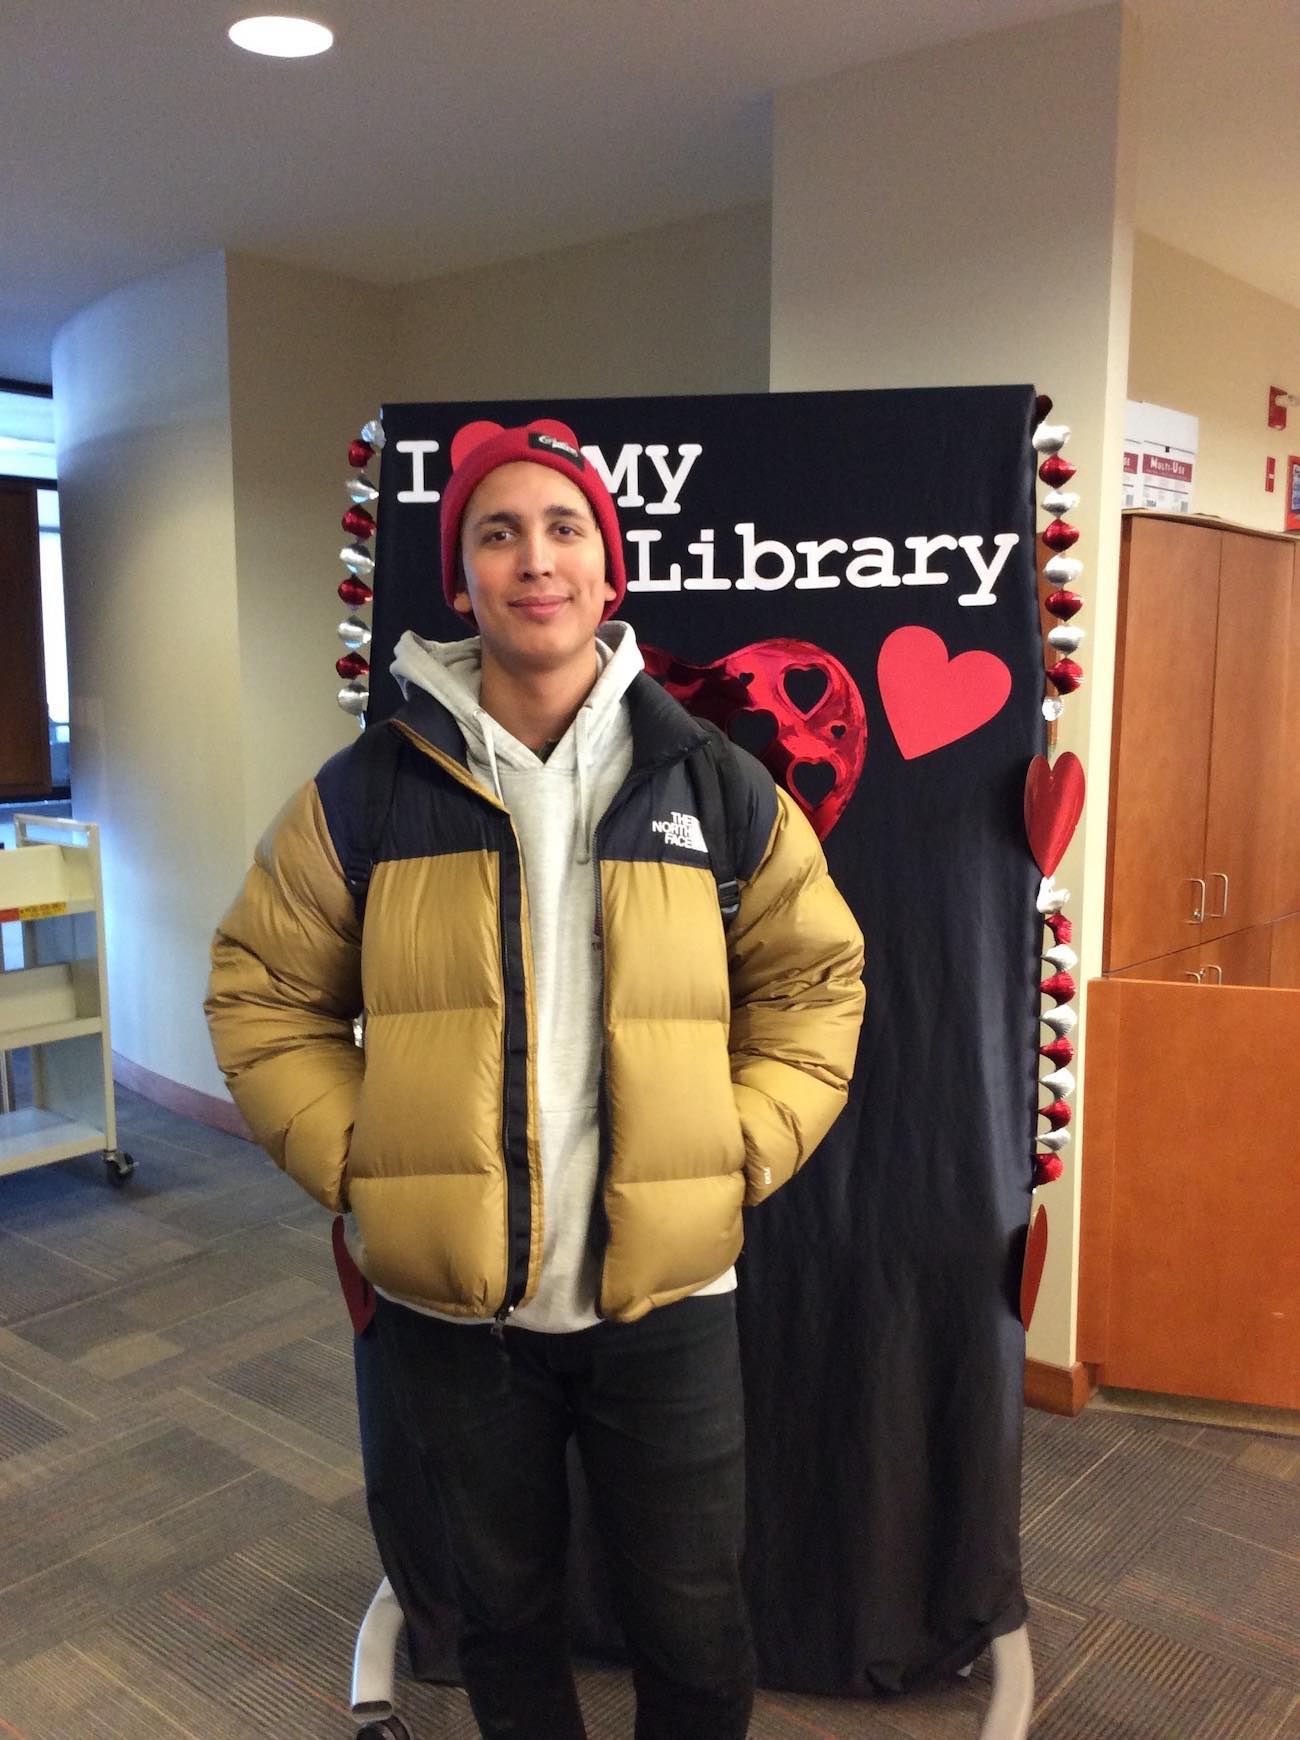 A smiling student in a red toque and yellow puffy jacket stands in front of the I love my library backdrop with his hands in his pockets.